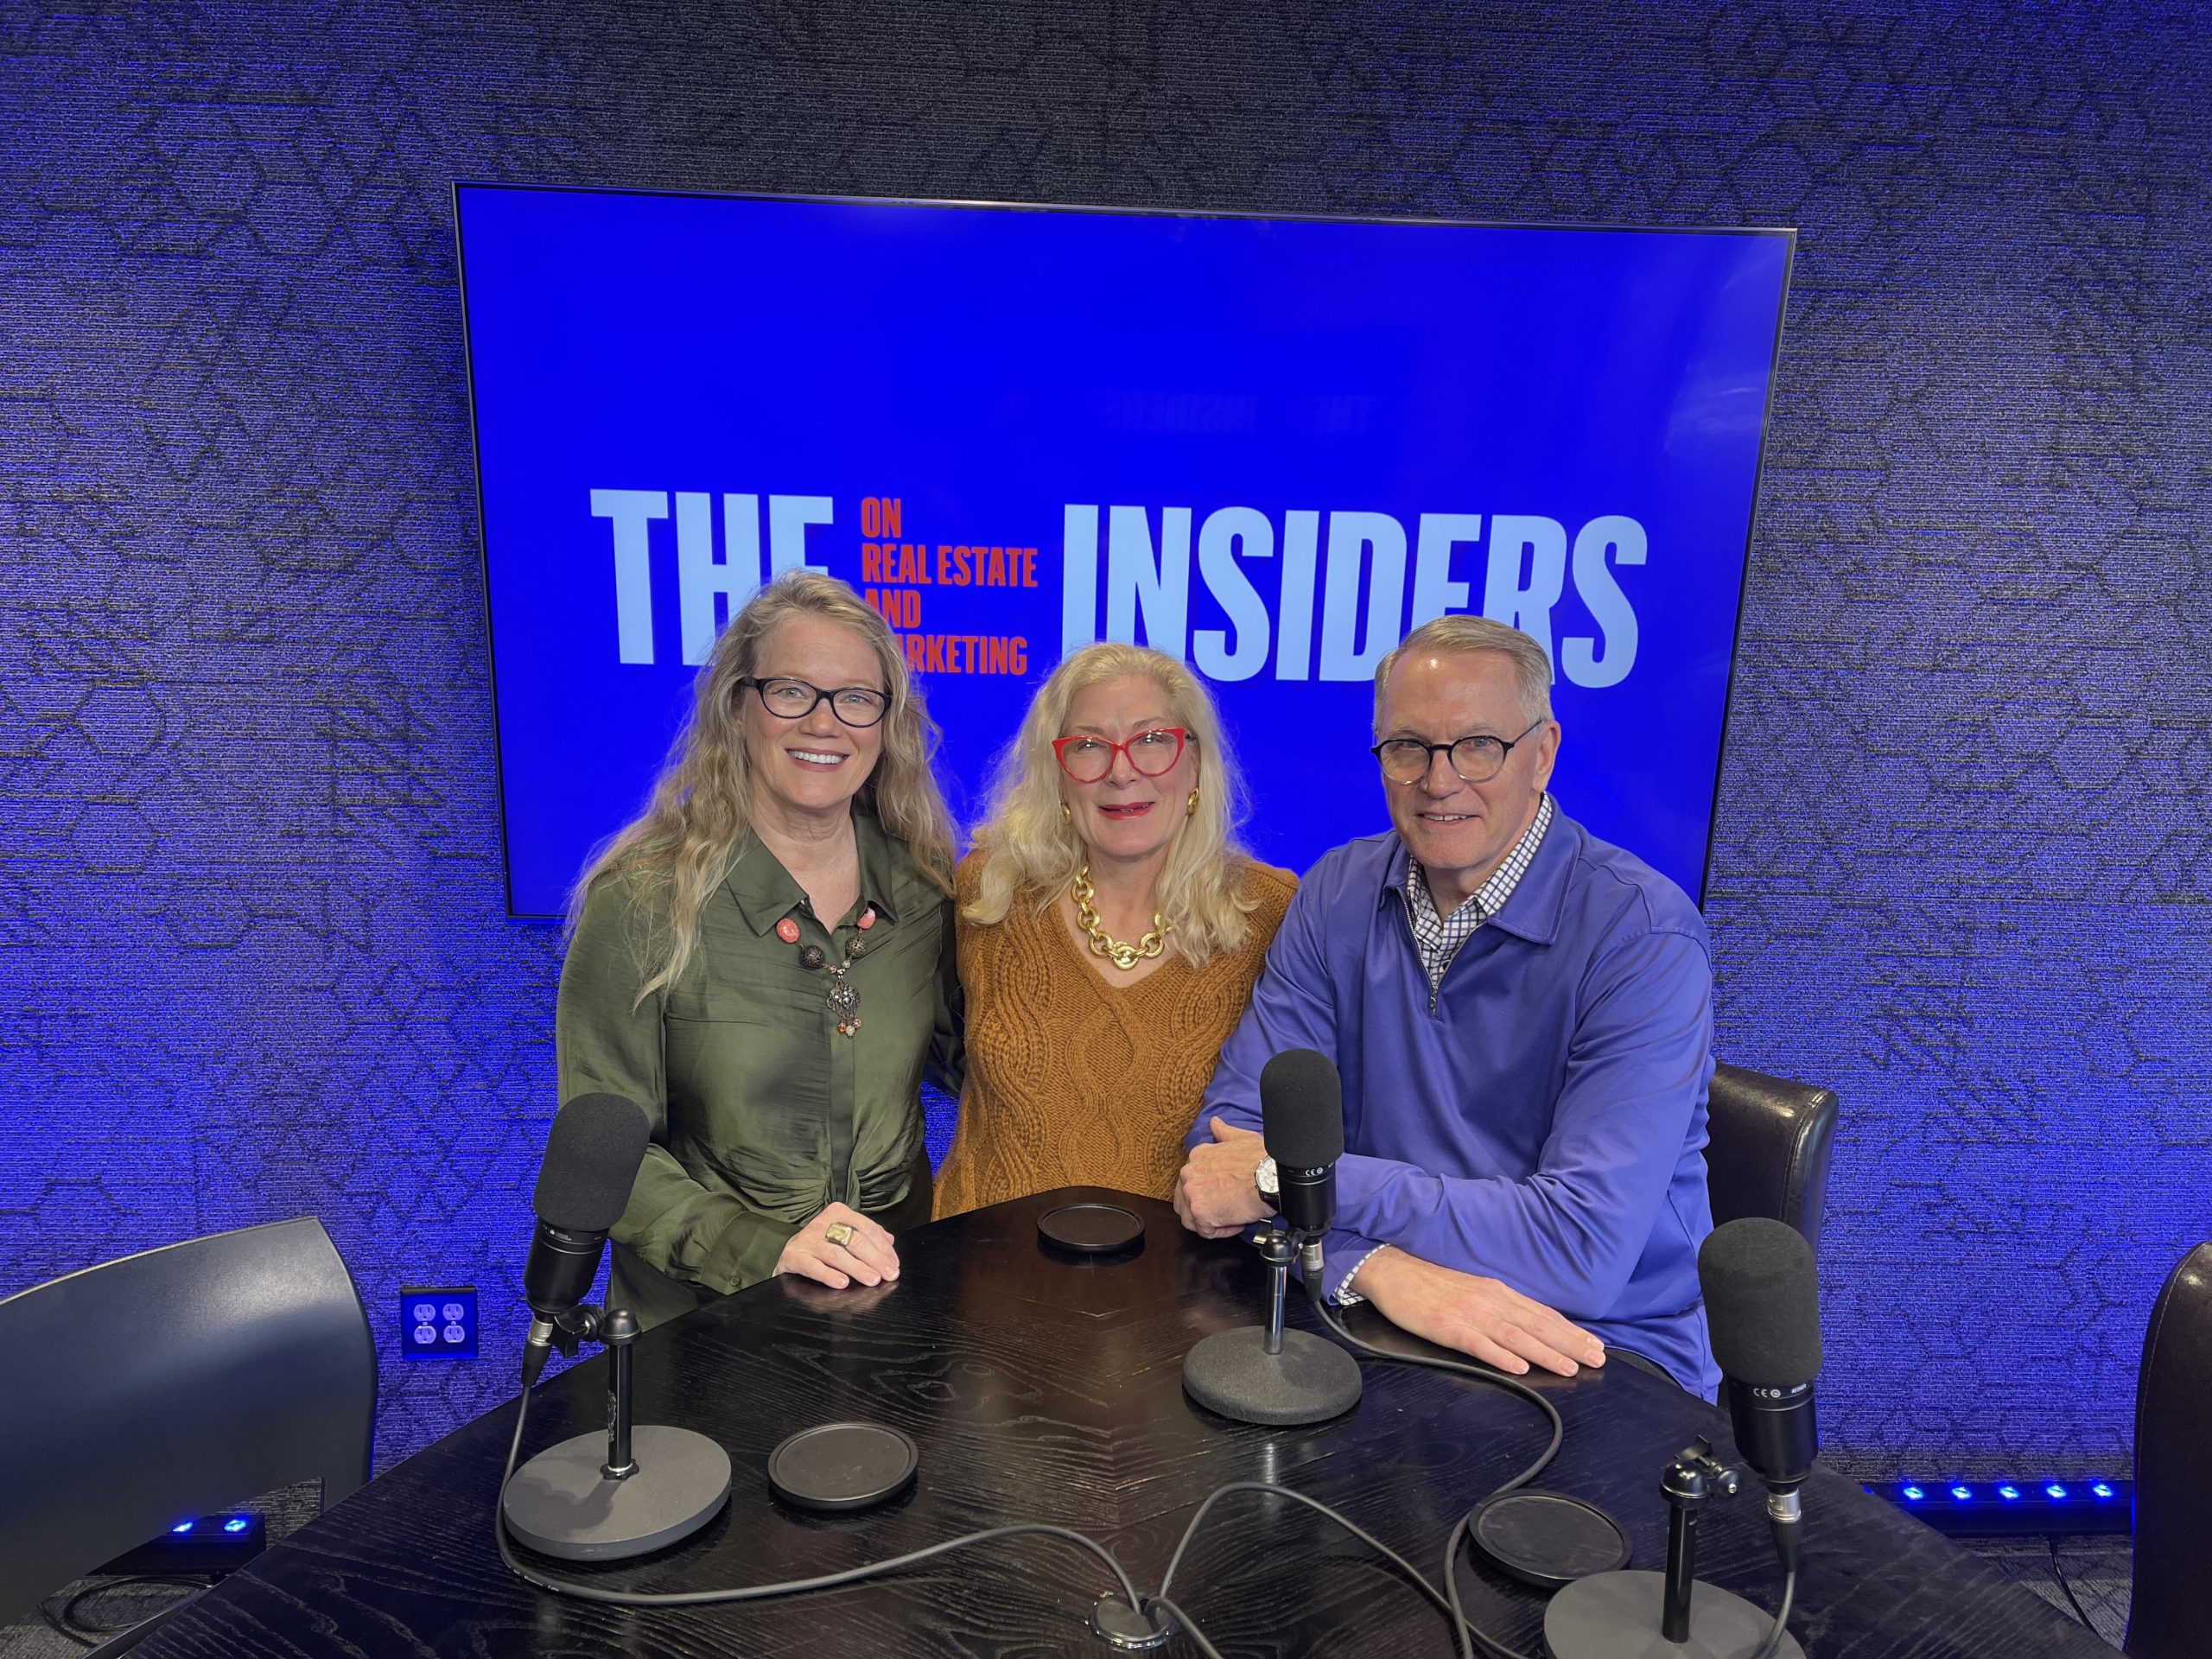 sandy hibbard candace evans of candy's dirt and marc miller on the set of the insiders on real estate and marketing at real news communications in dallas